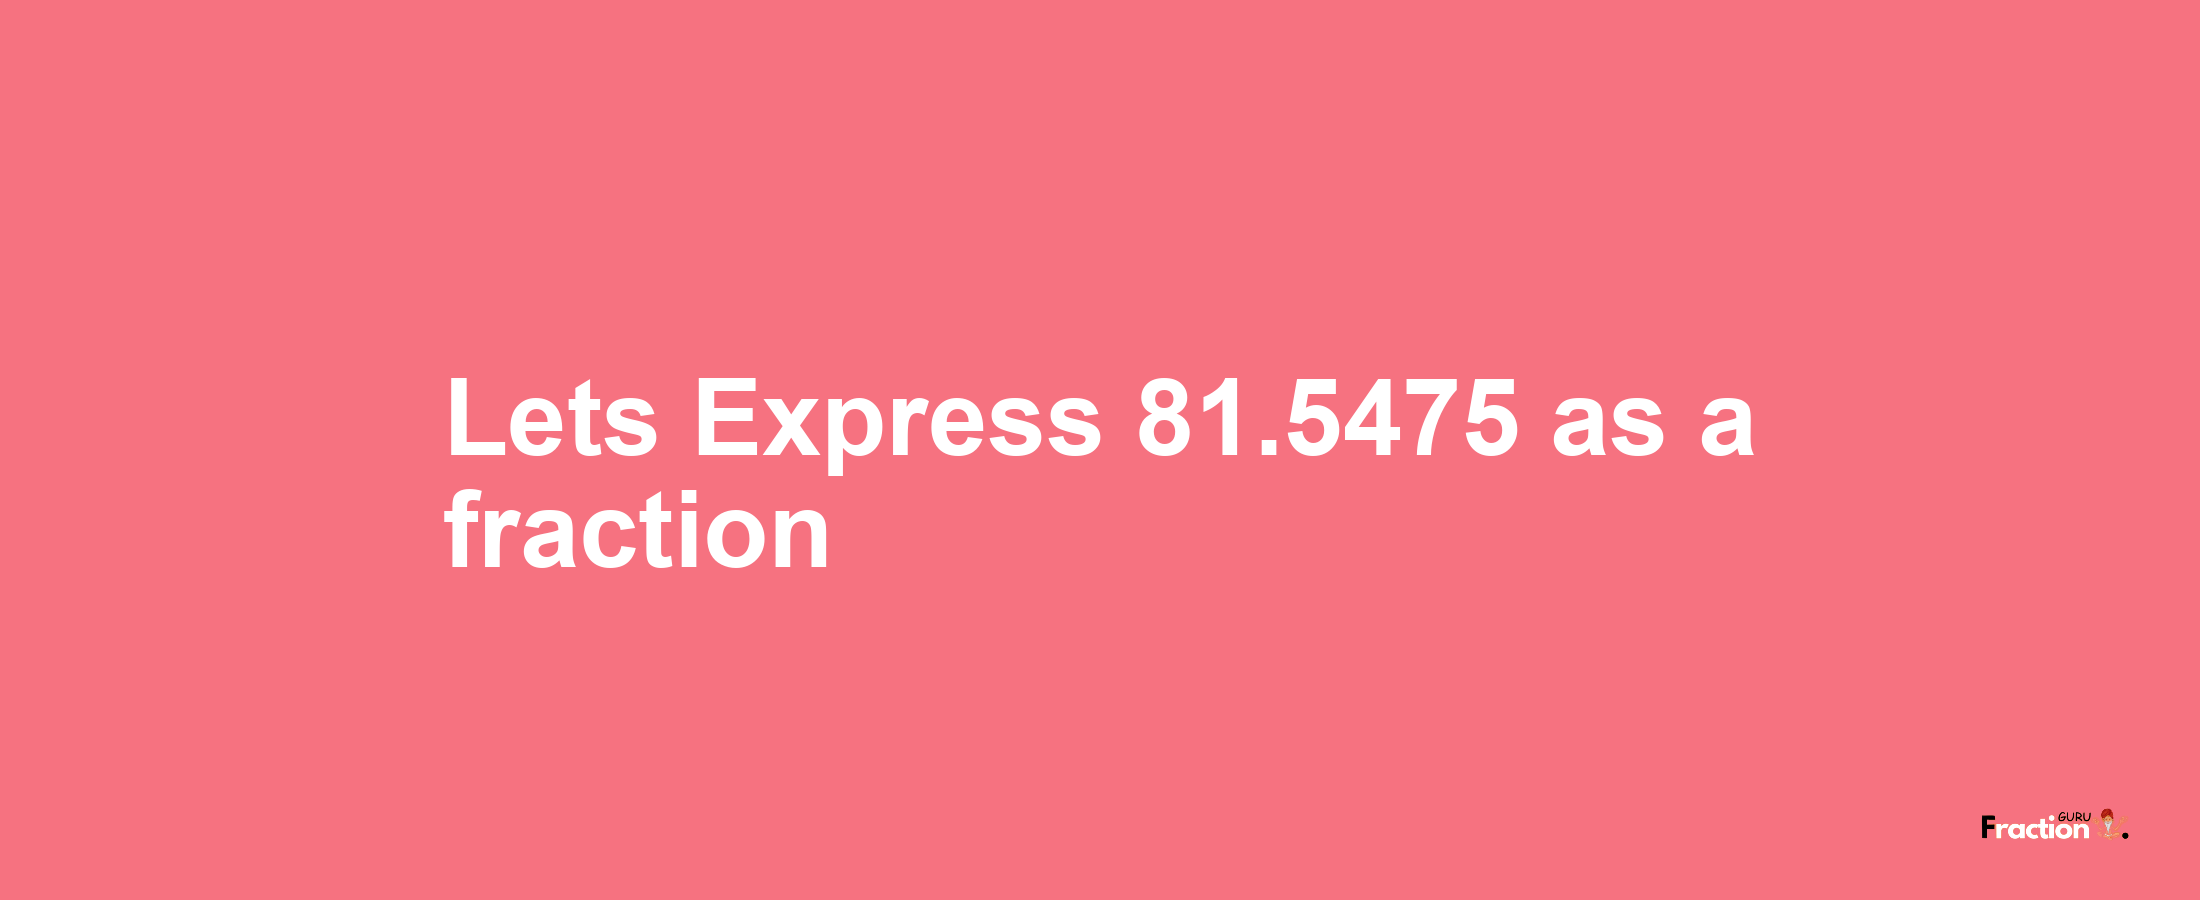 Lets Express 81.5475 as afraction